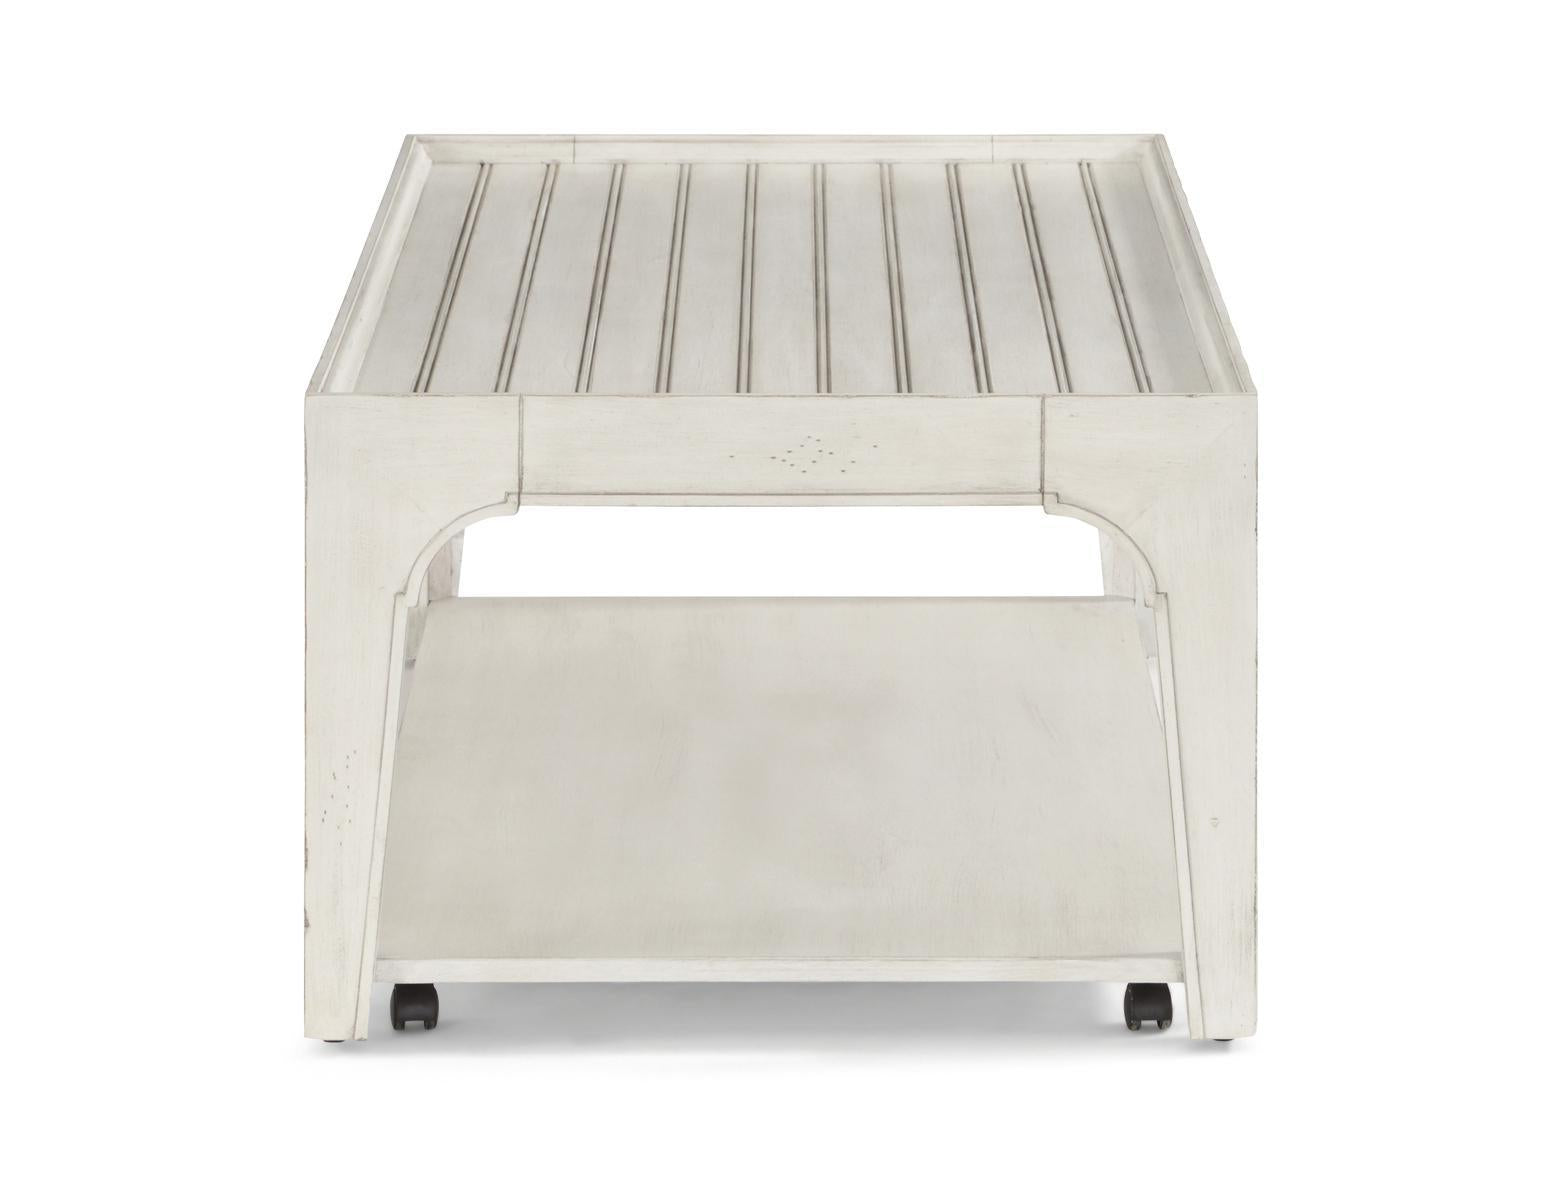 Flexsteel Harmony Rectangular Cocktail Table with Casters in White